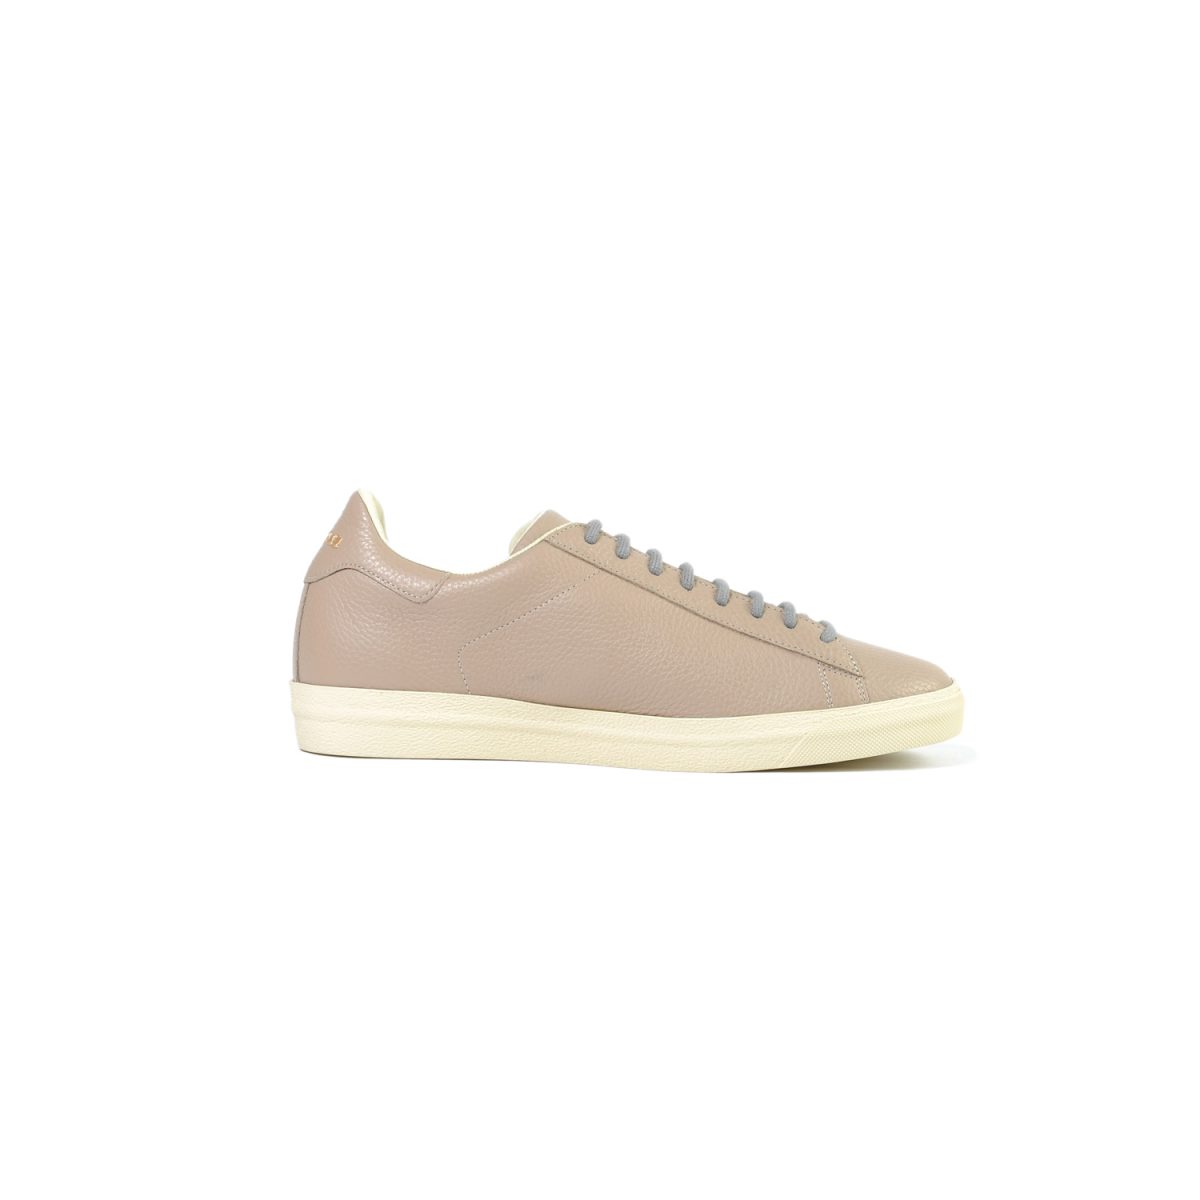 Tisza shoes - Simple - Sand